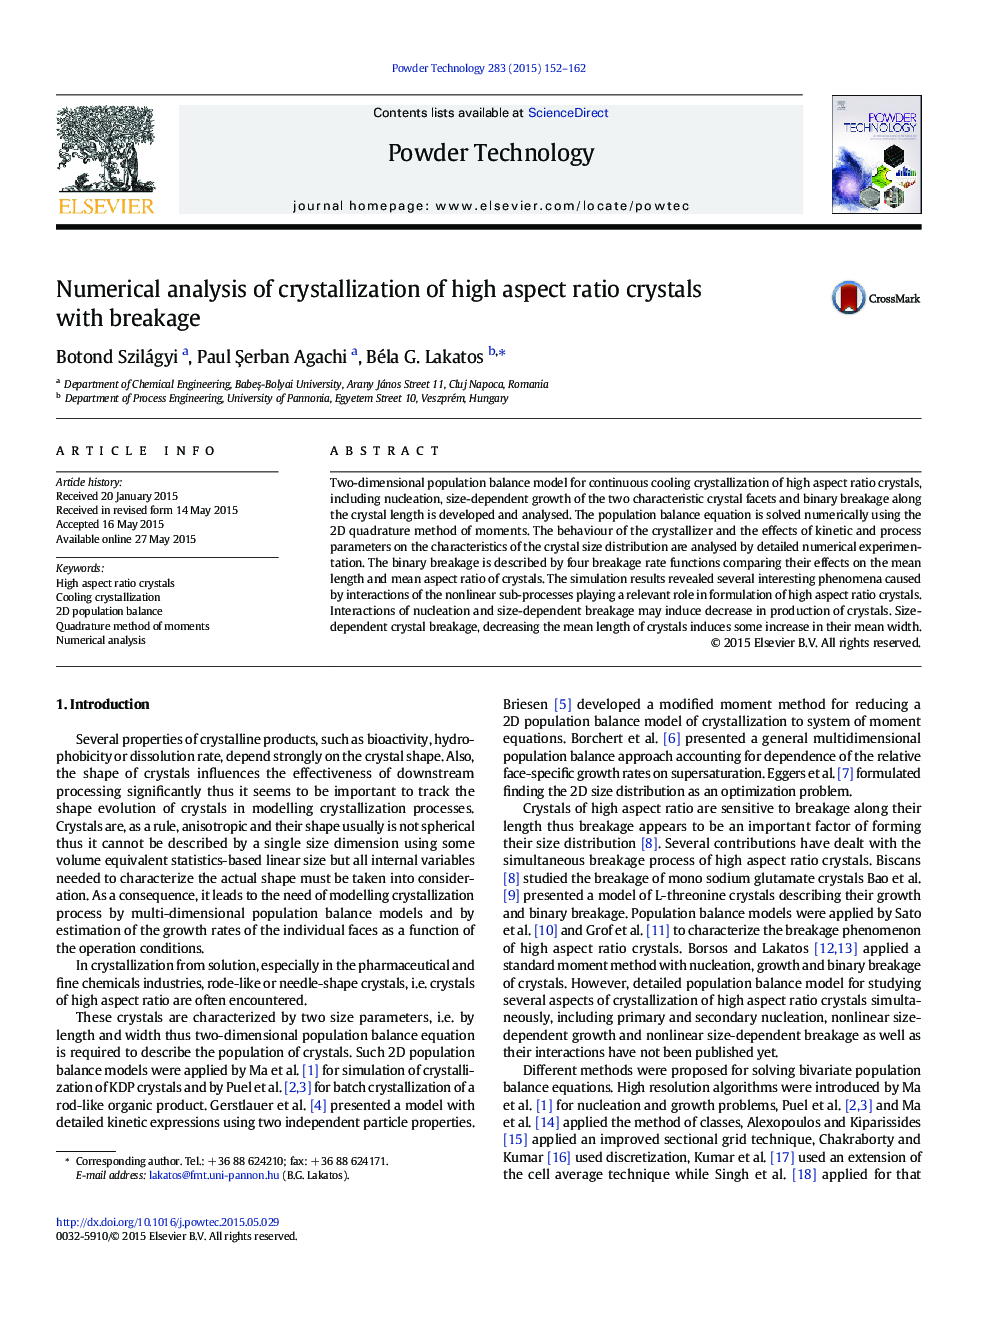 Numerical analysis of crystallization of high aspect ratio crystals with breakage